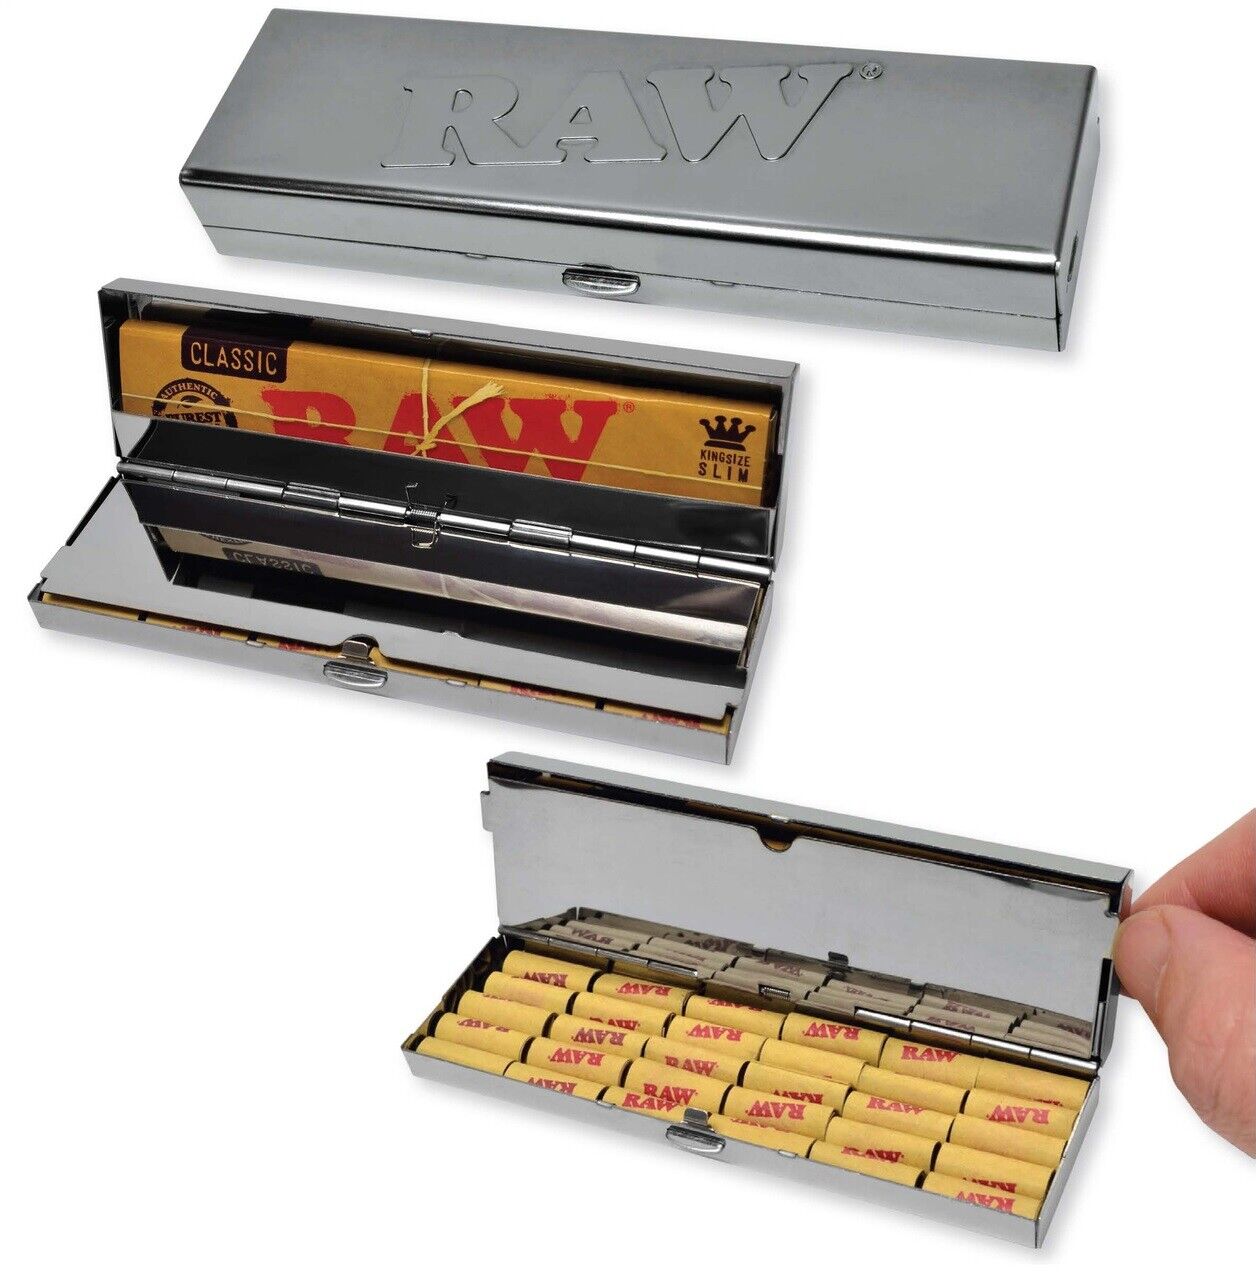 RAW Metal Storage Case - Holds King Size Rolling Papers& up to 30 PreRolled Tips